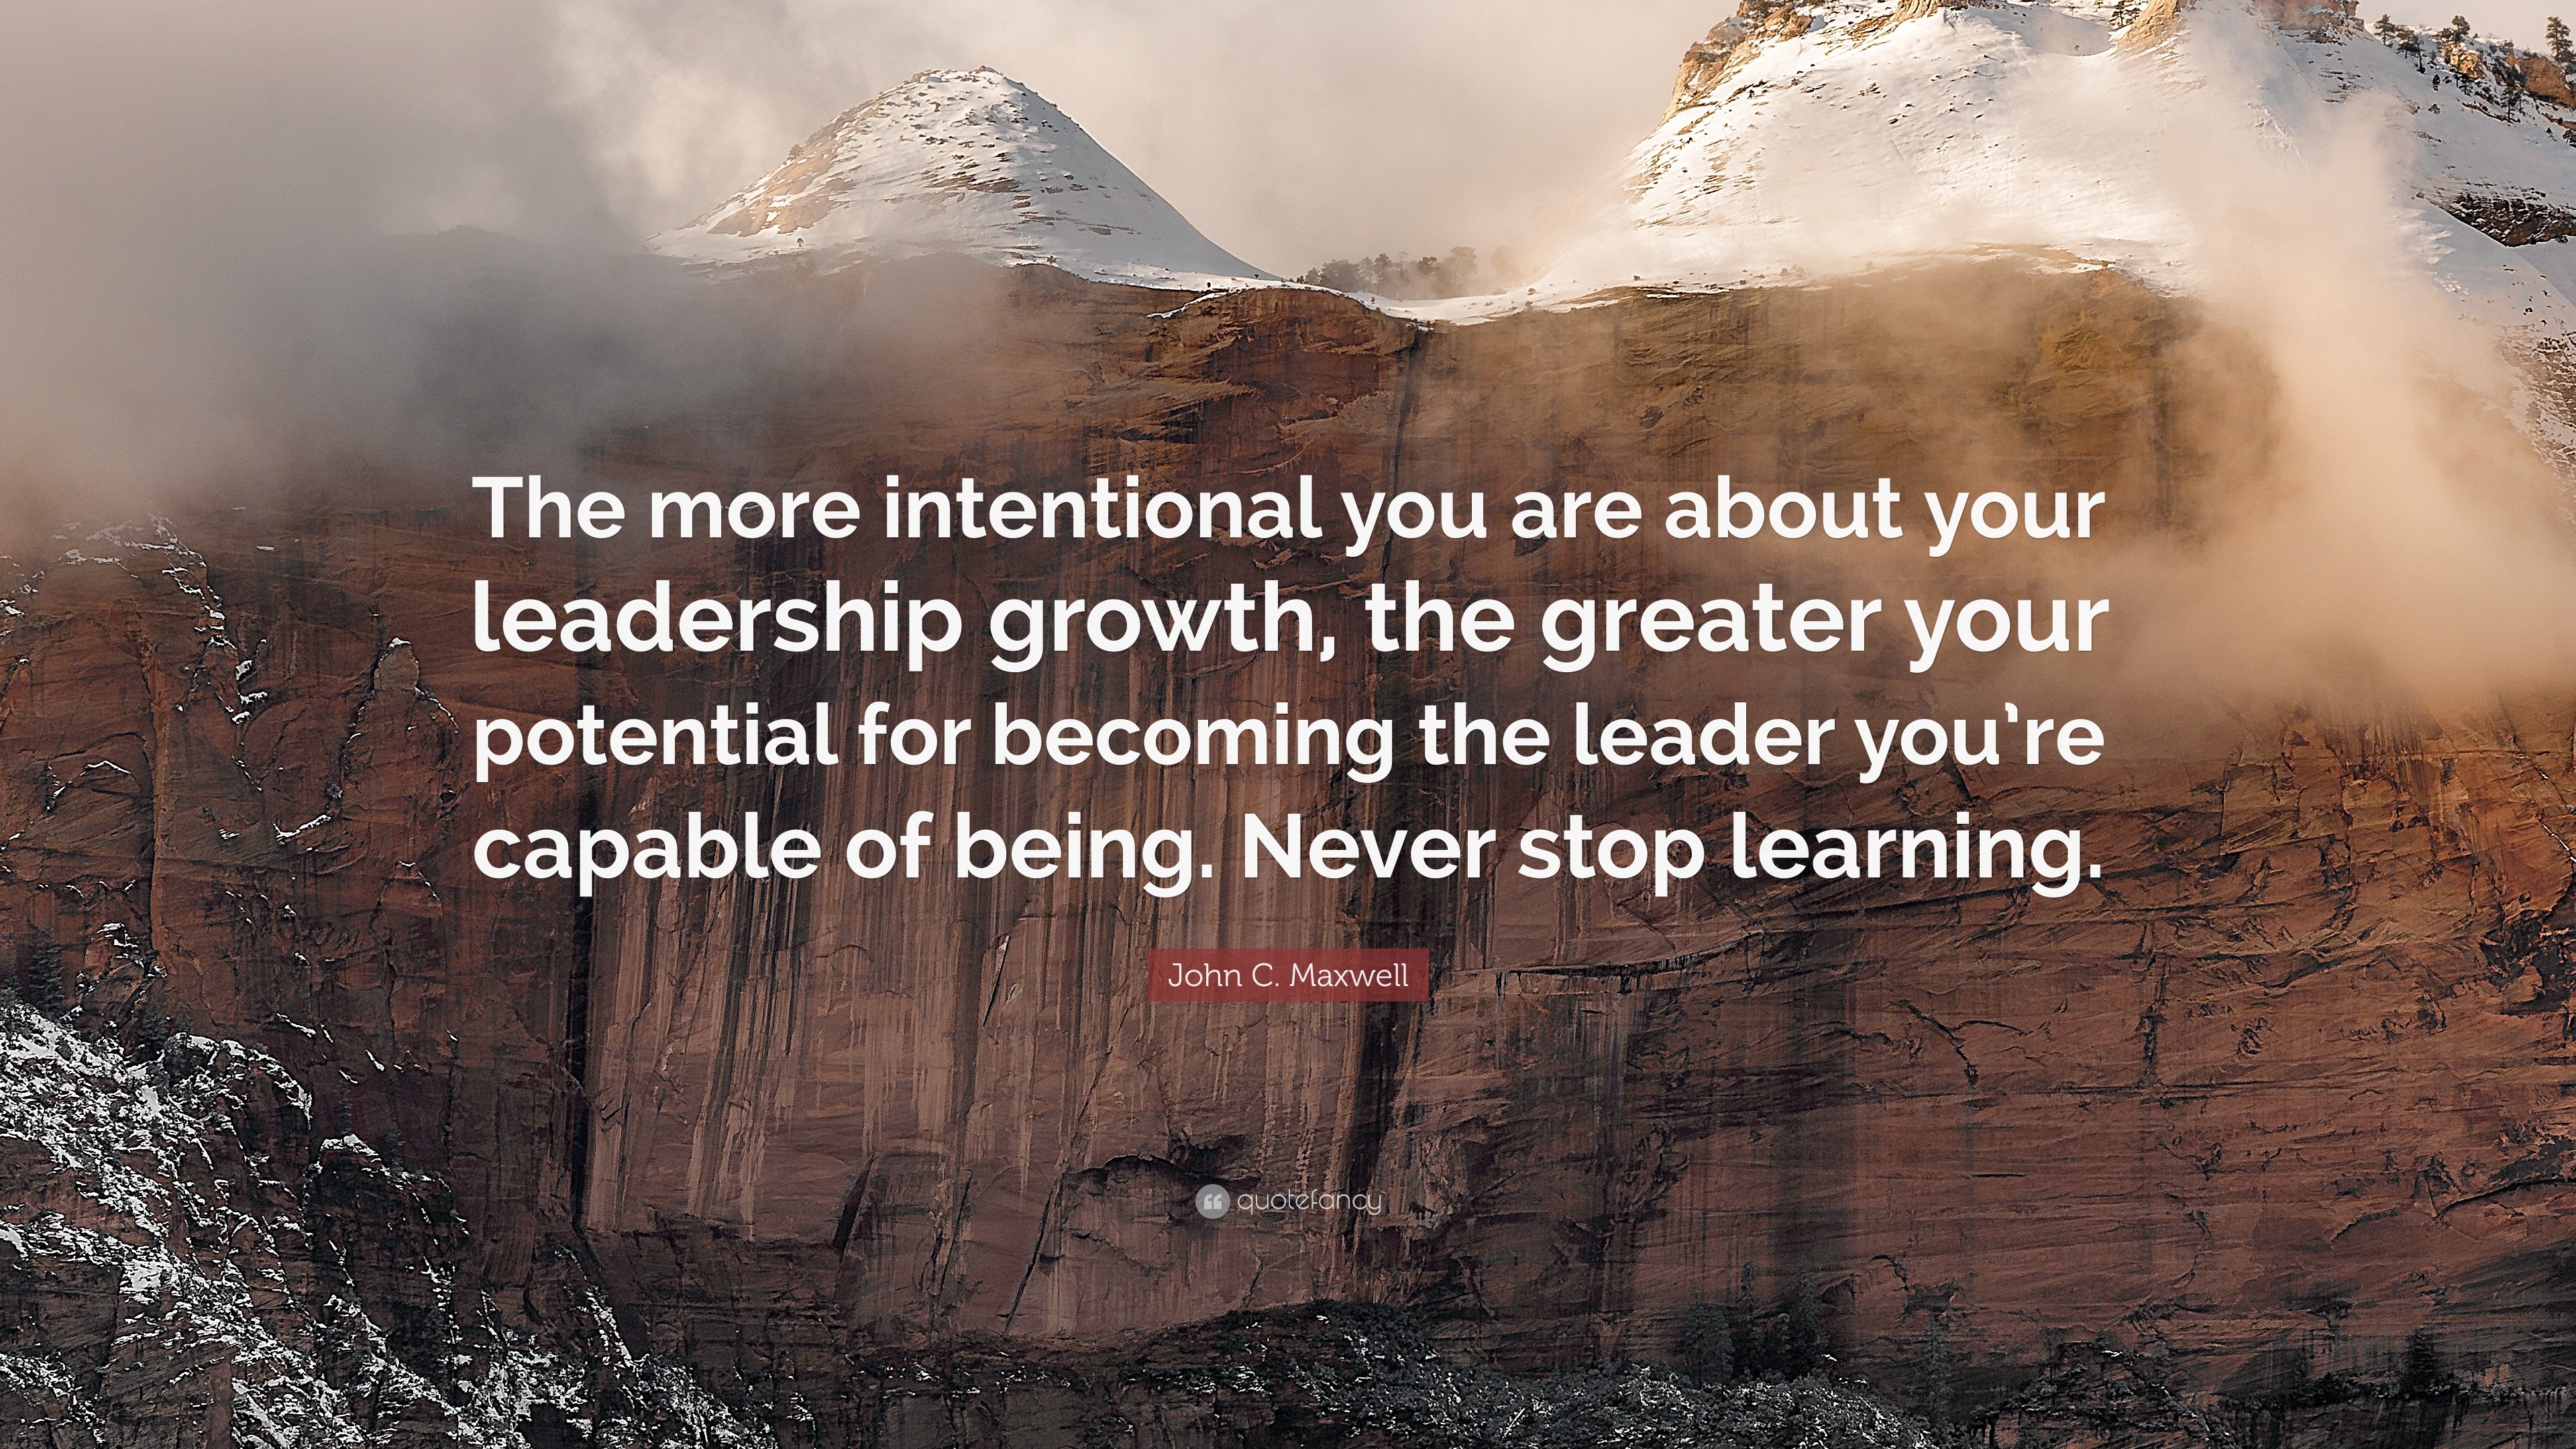 John C. Maxwell Quote: “The more intentional you are about your